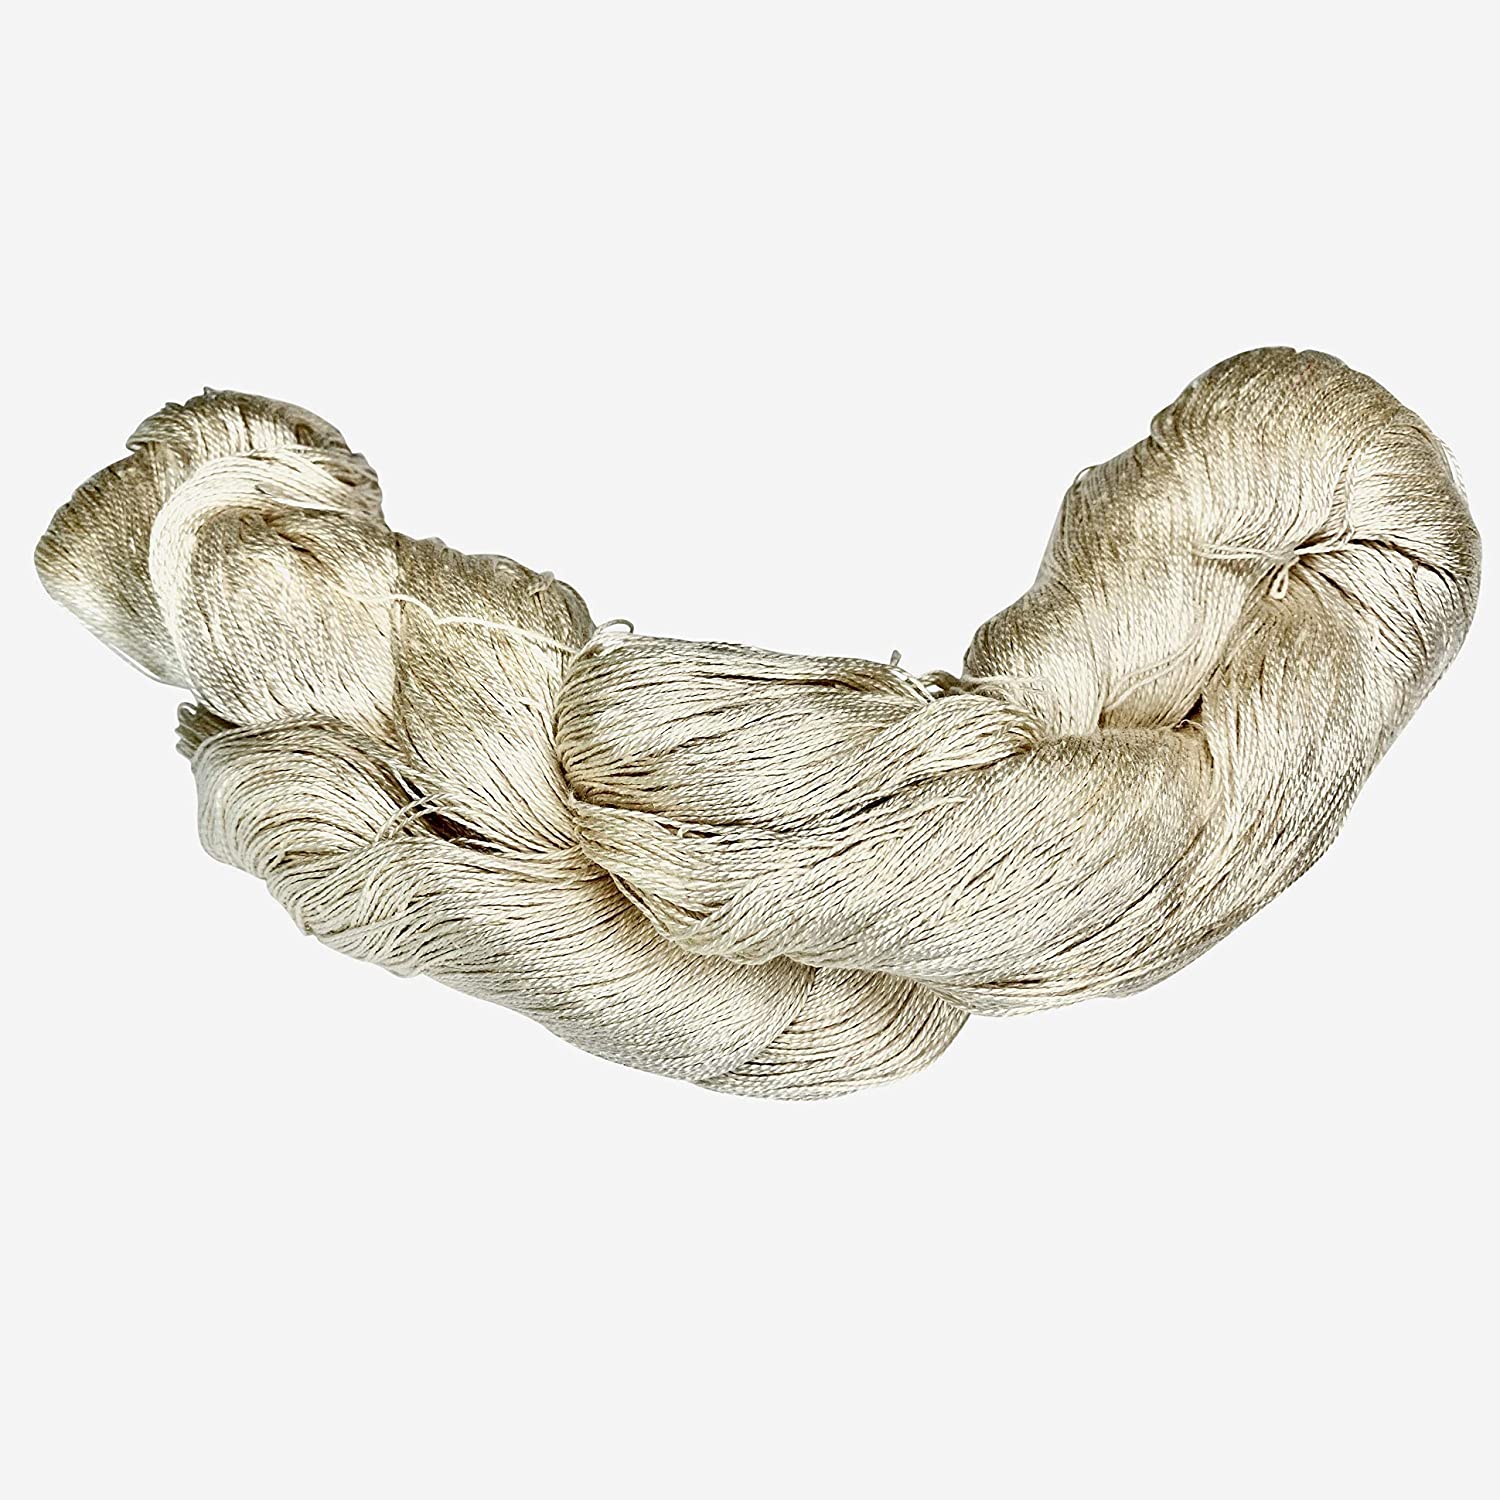 100% Mulberry Silk Yarn - Undyed - Lace Weight 20/2 - 100 Grams & Approximately 1,000 Yards per Skein-Yarn-Revolution Fibers-2 Pack (200 Grams)-Revolution Fibers